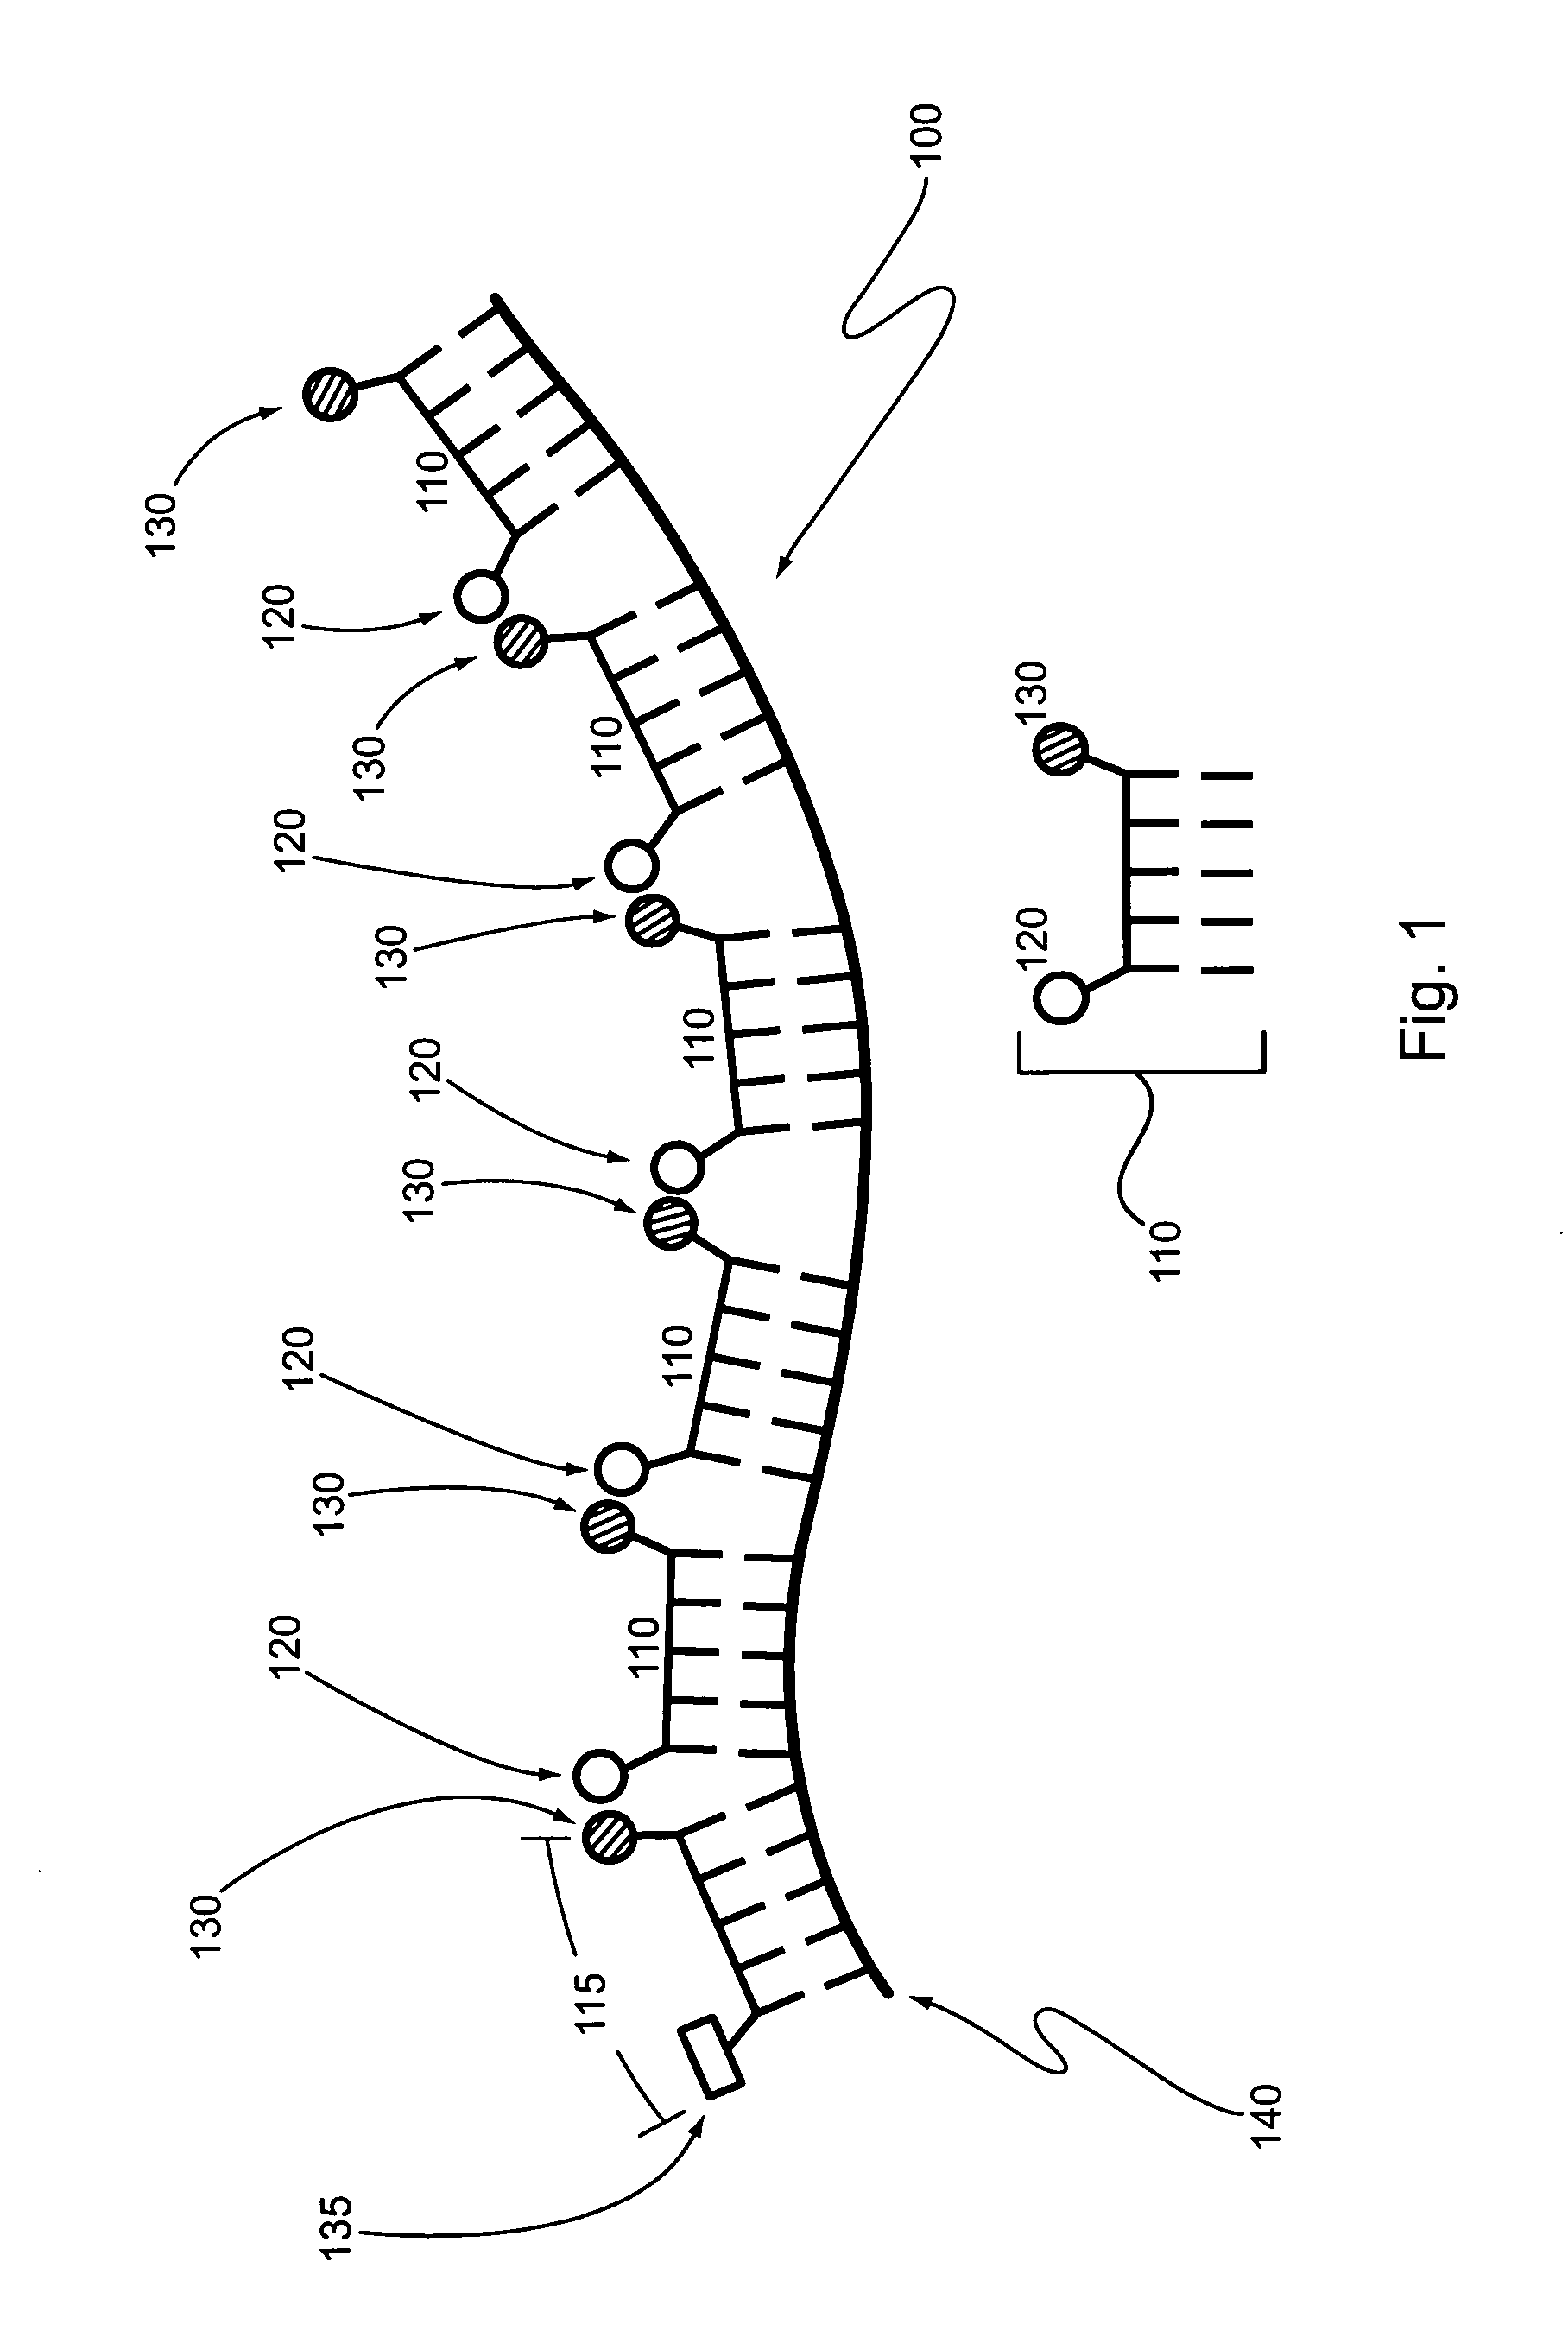 Helicase-assisted sequencing with molecular beacons